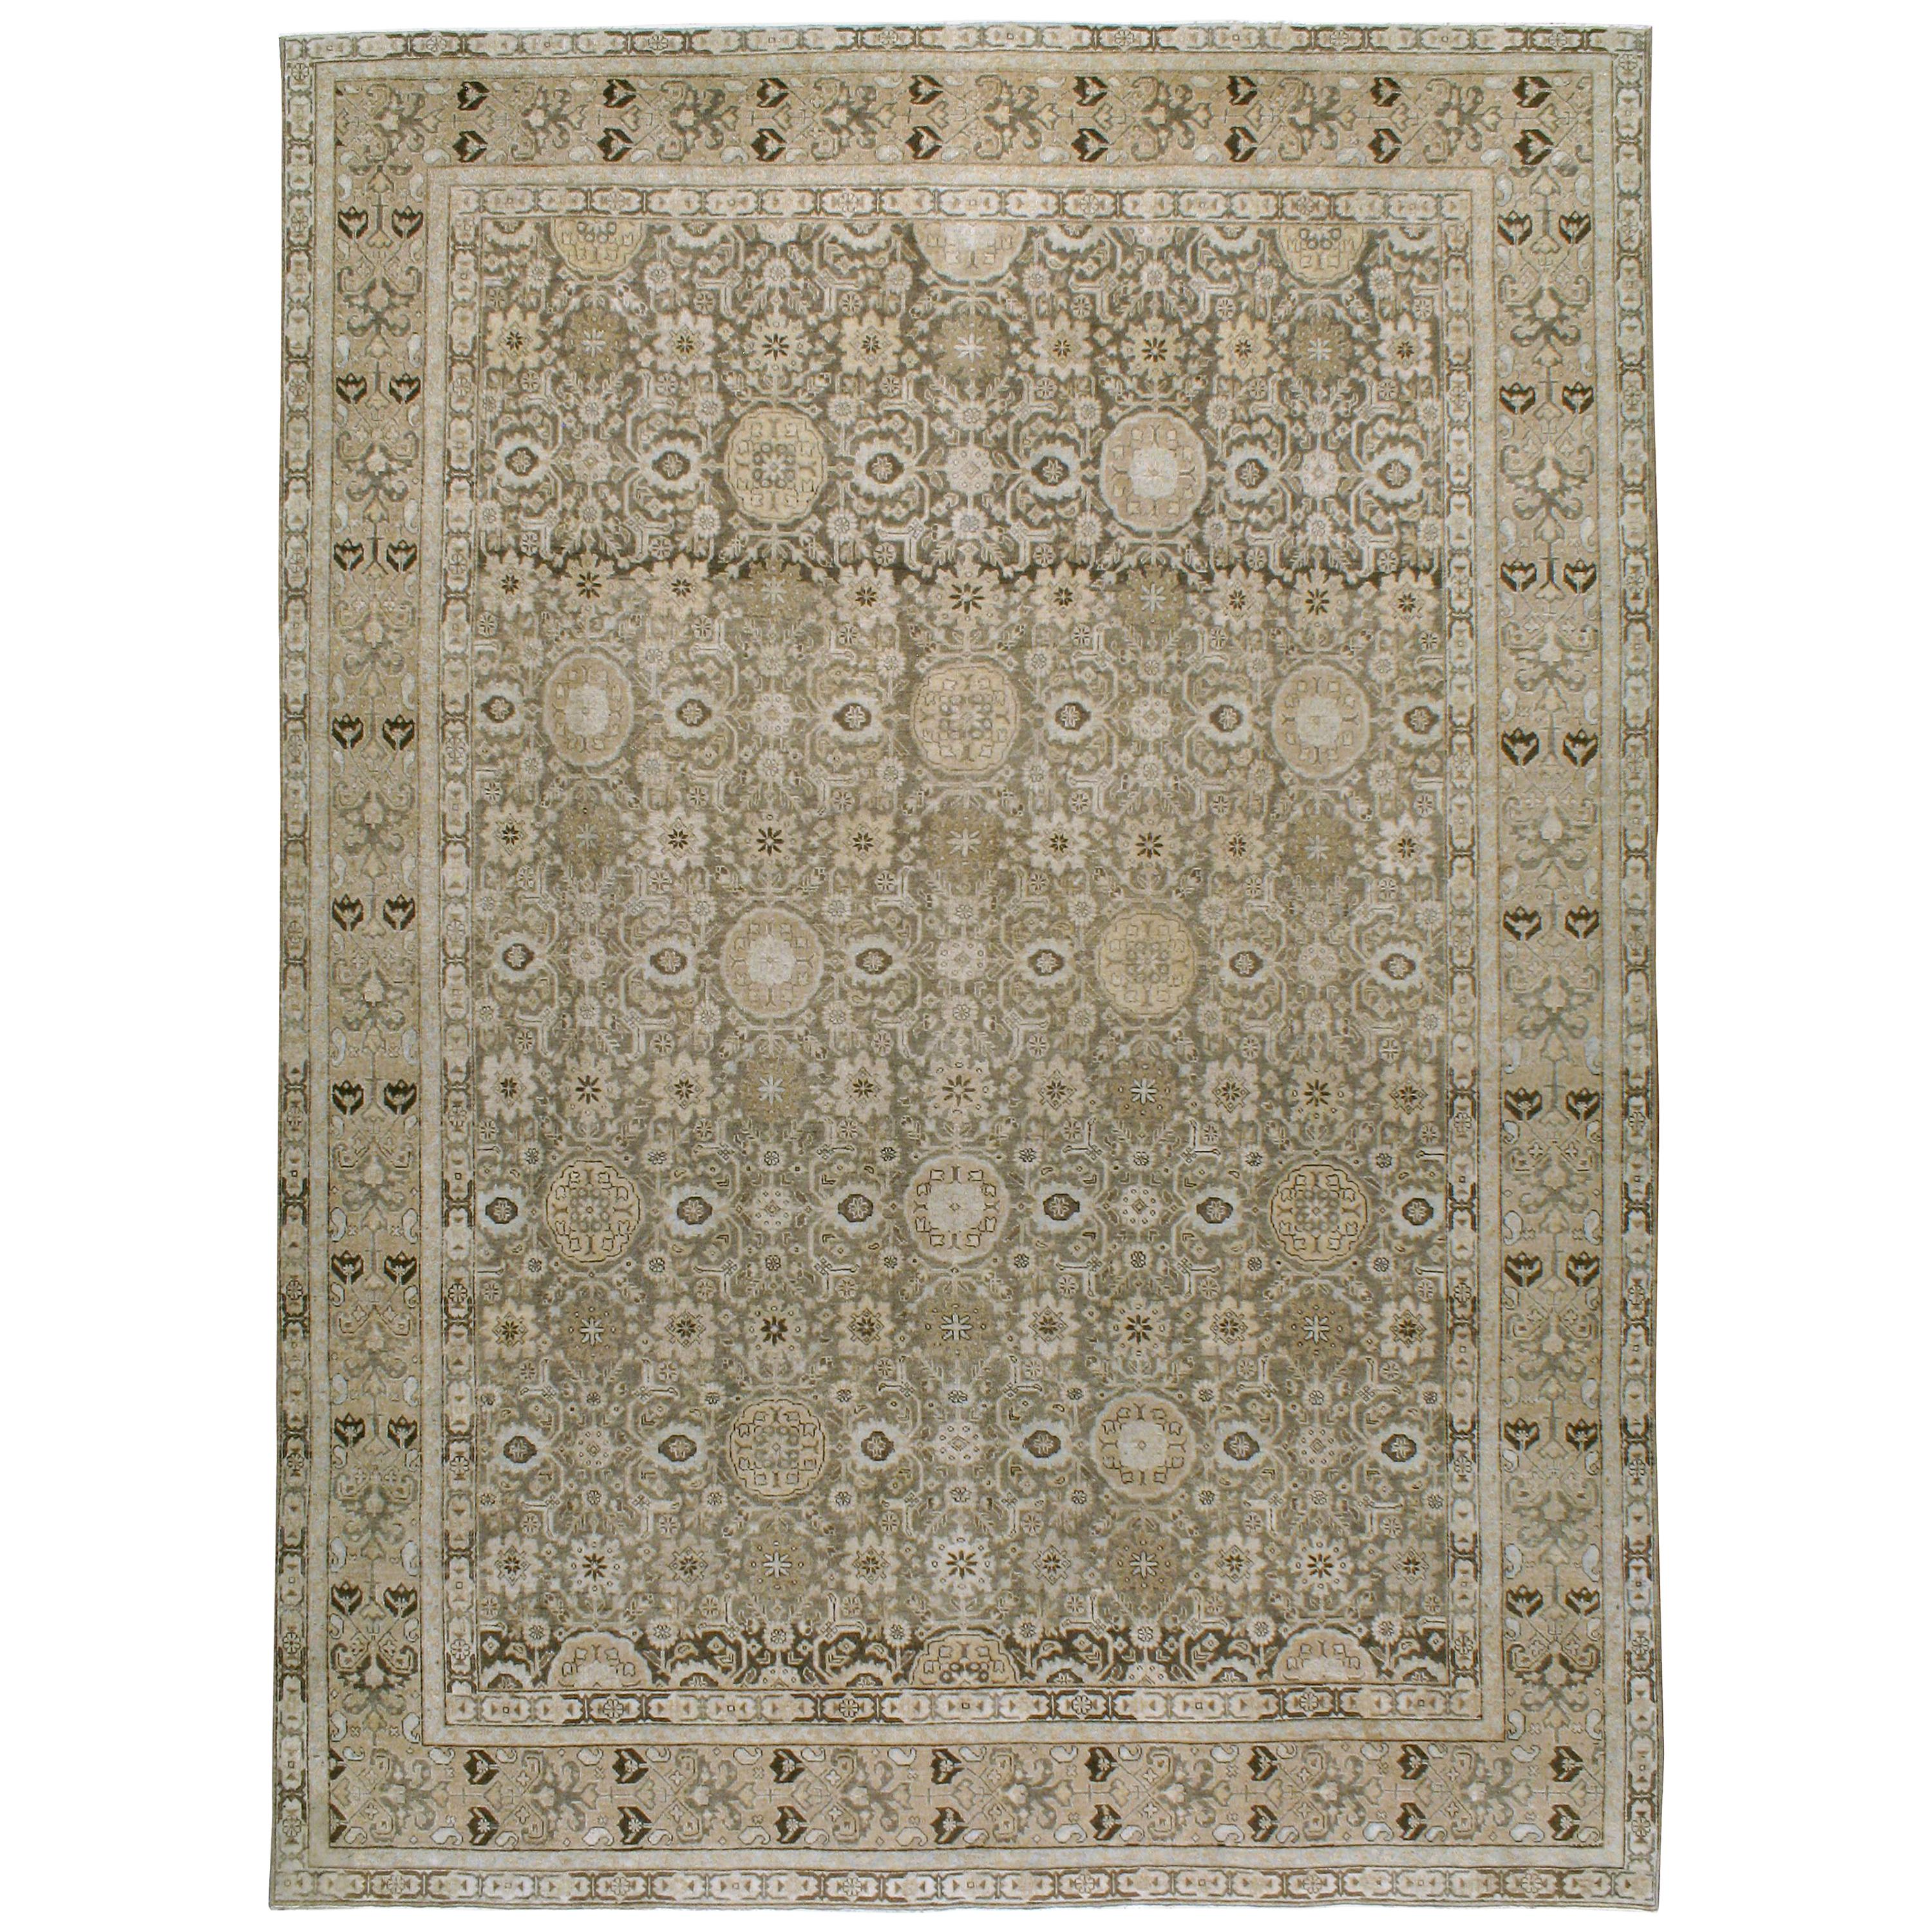 Early 20th Century Handmade Persian Tabriz Room Size Carpet In Neutral Colors